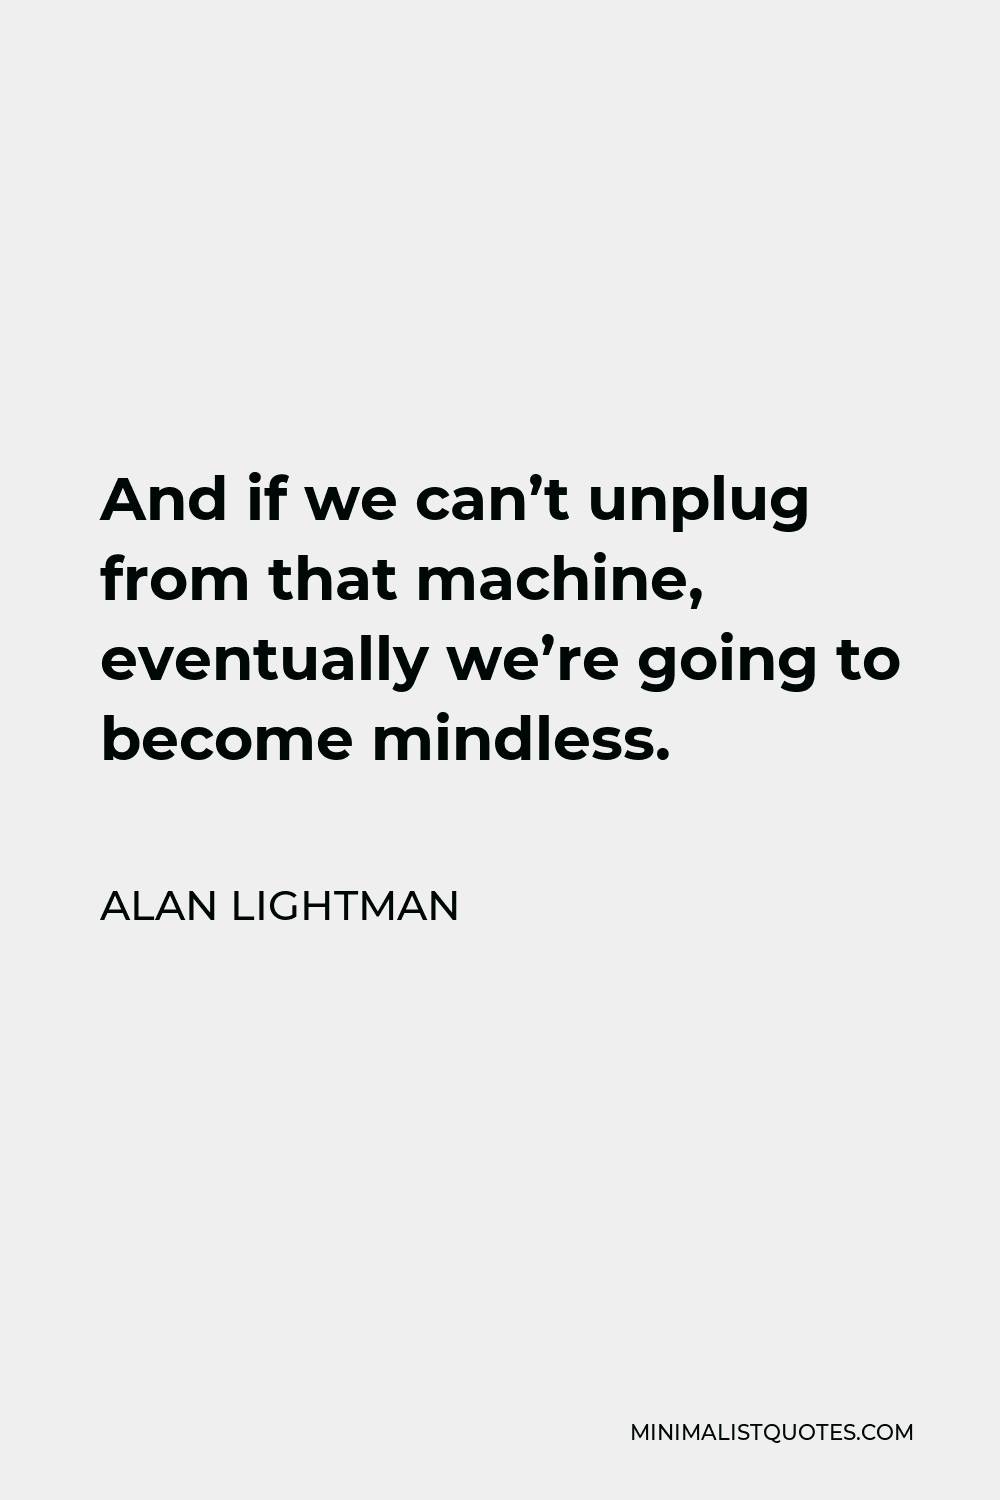 Alan Lightman Quote - And if we can’t unplug from that machine, eventually we’re going to become mindless.